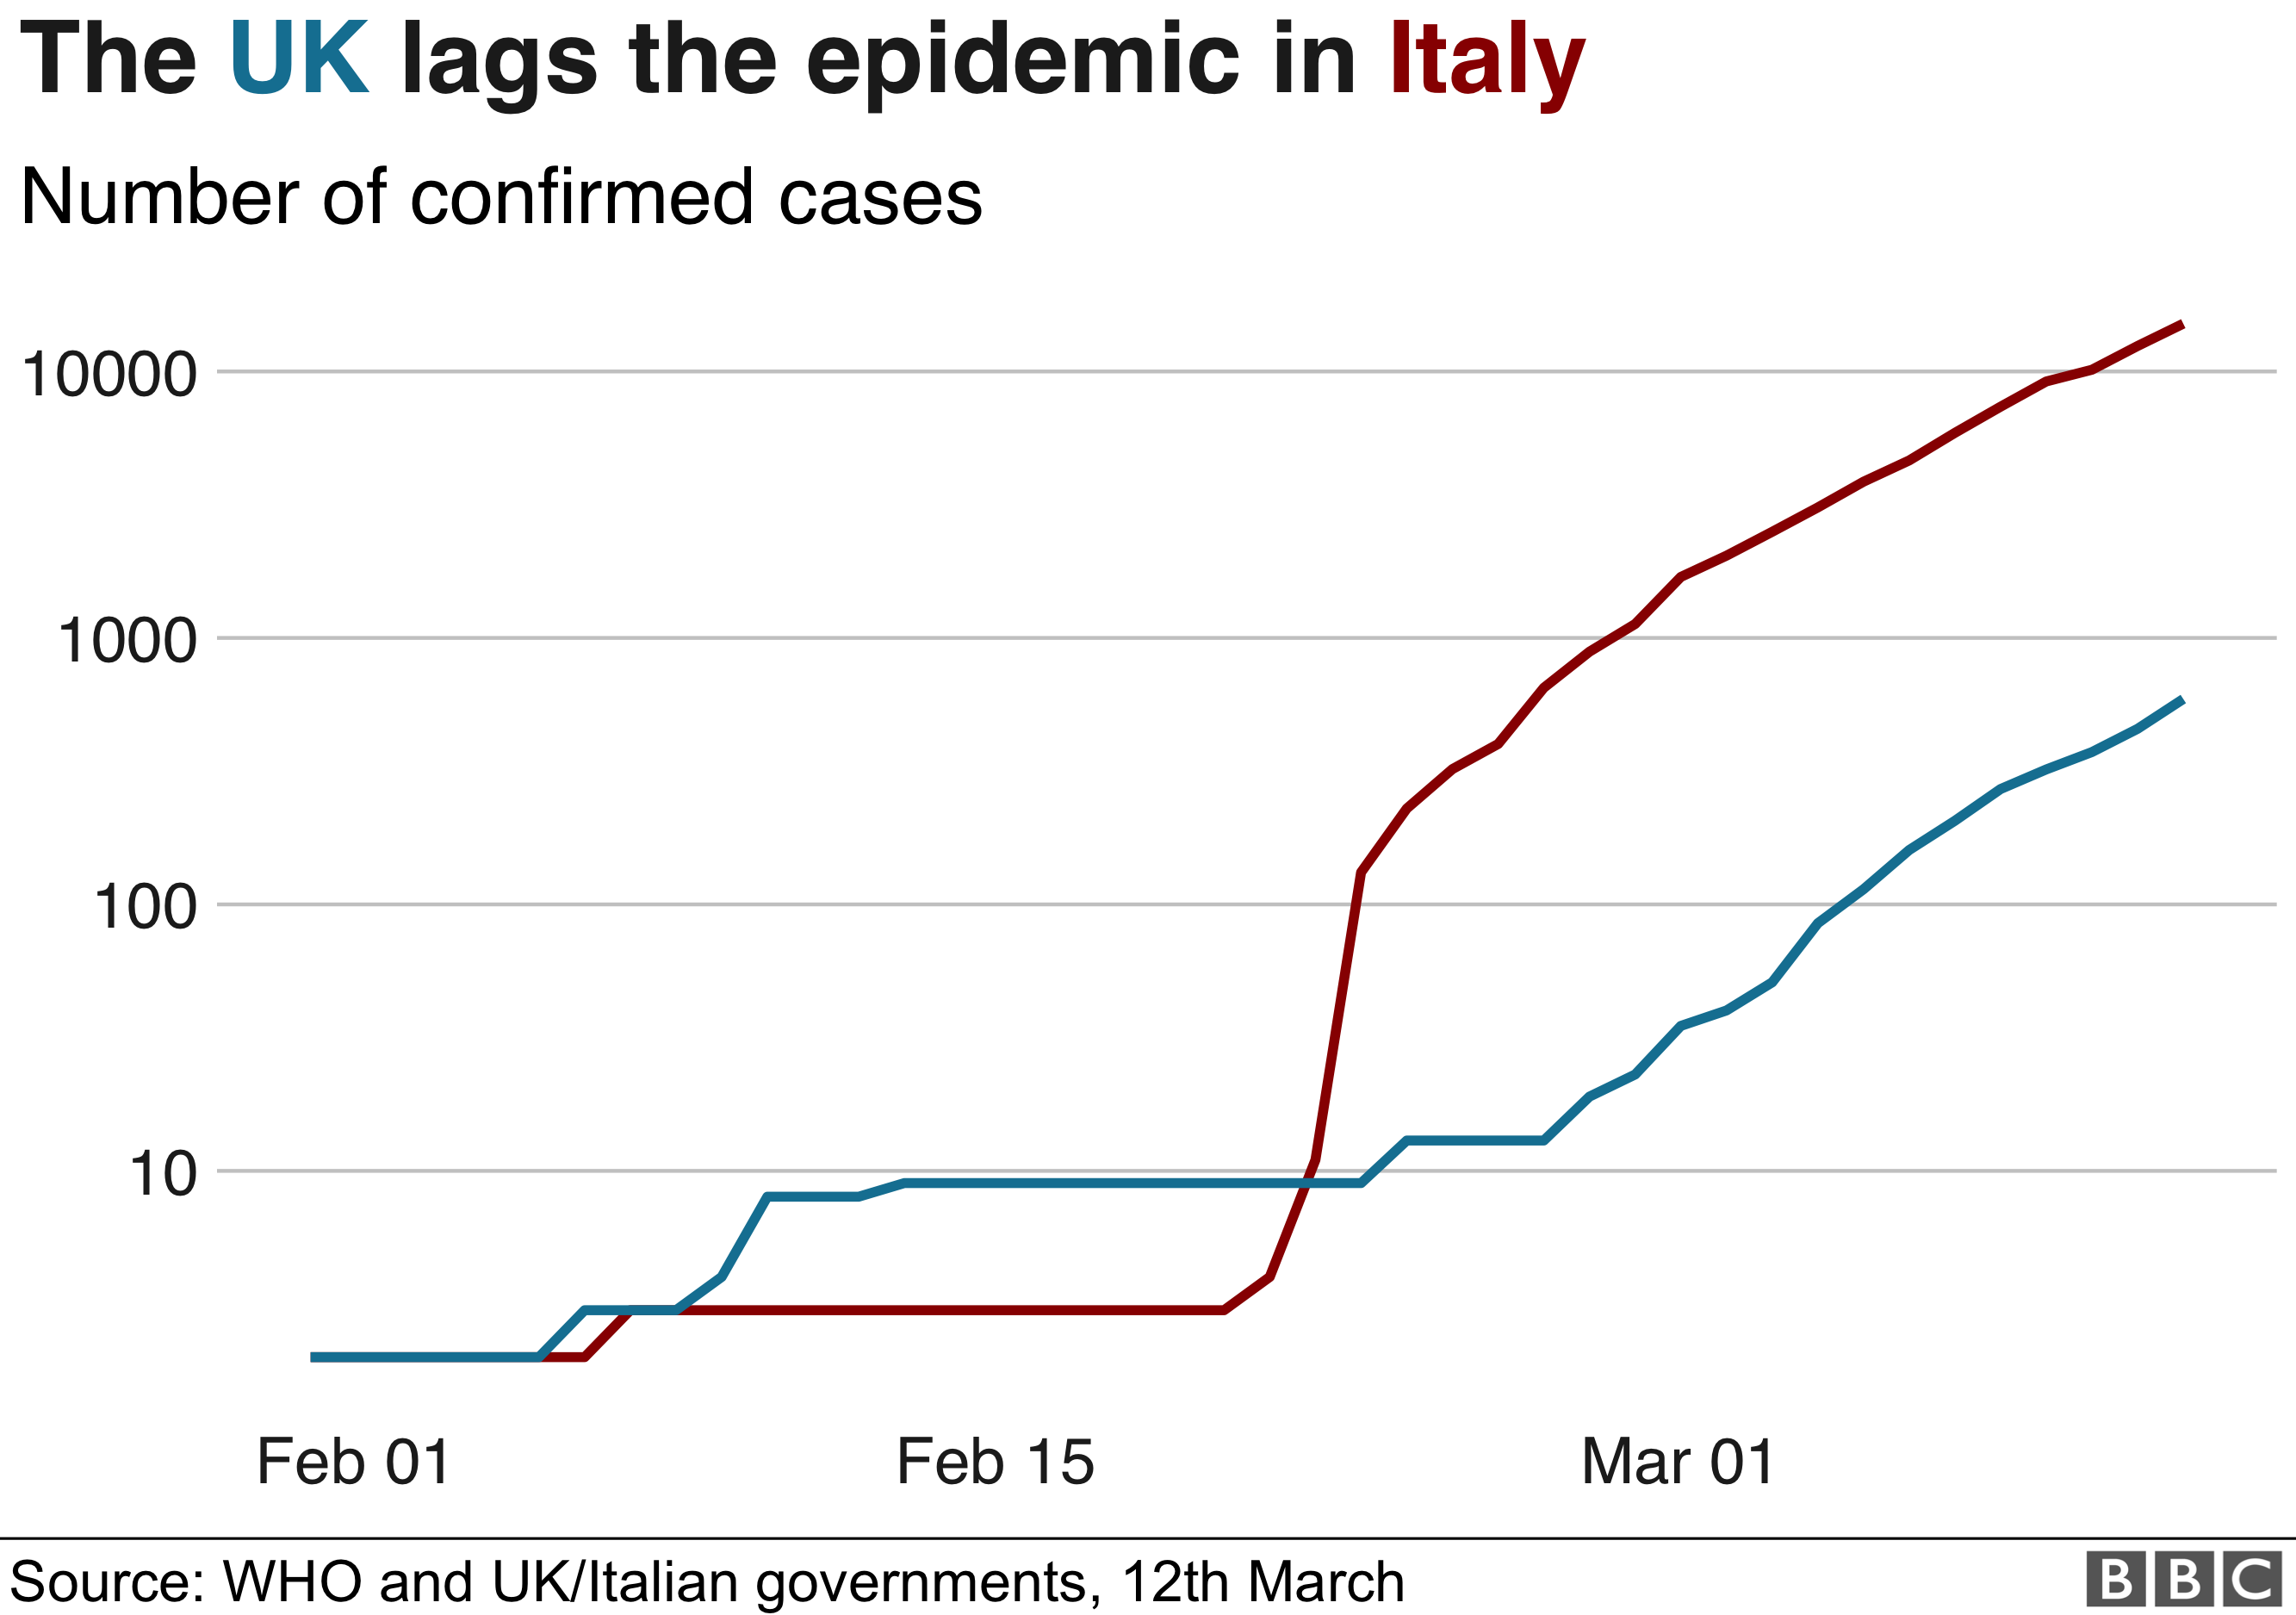 Chart showing how many cases of coronavirus Italy has compared to the UK. The UK figure is below 1000 while Italy's is above 10,000